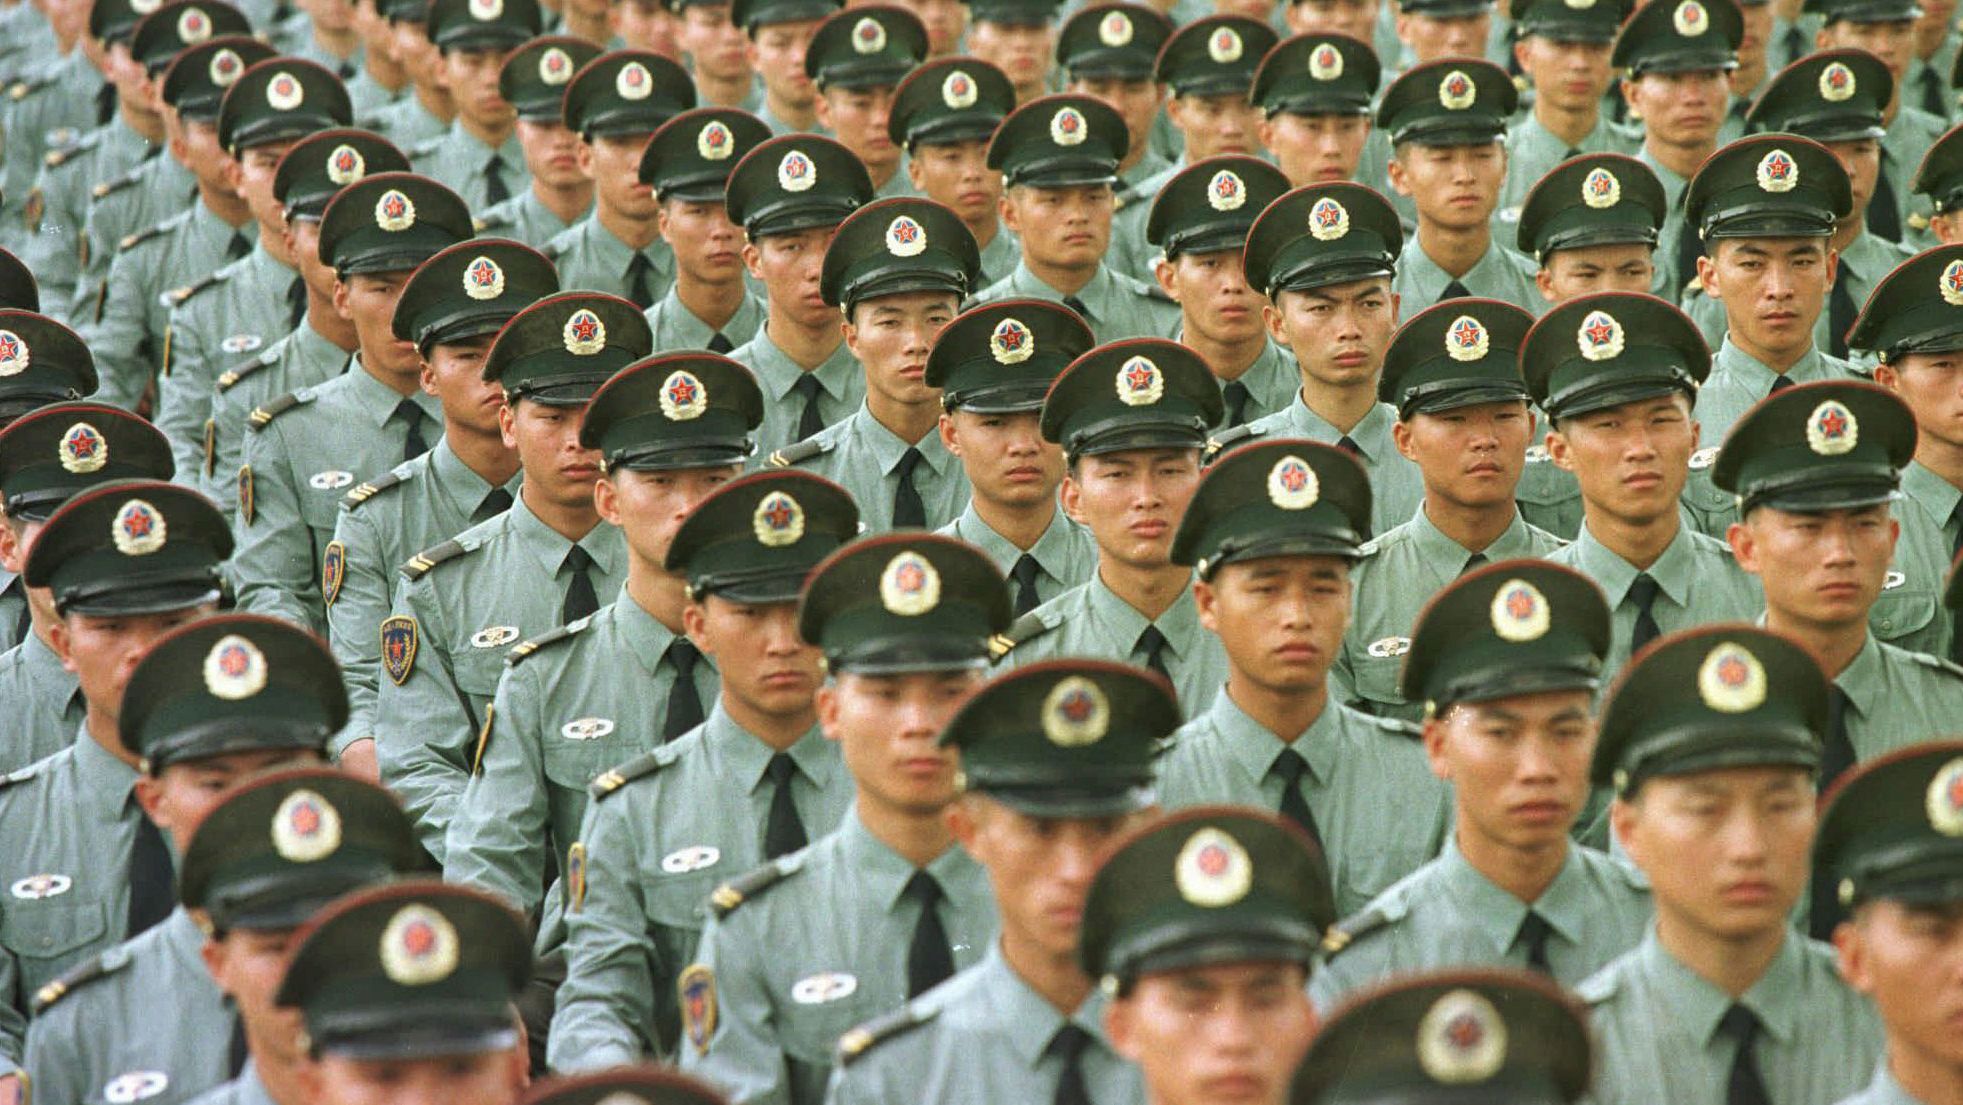 Chinese soldiers line up in formation on June 30, 1997, a day before the British colony of Hong Kong was returned to Chinese rule.